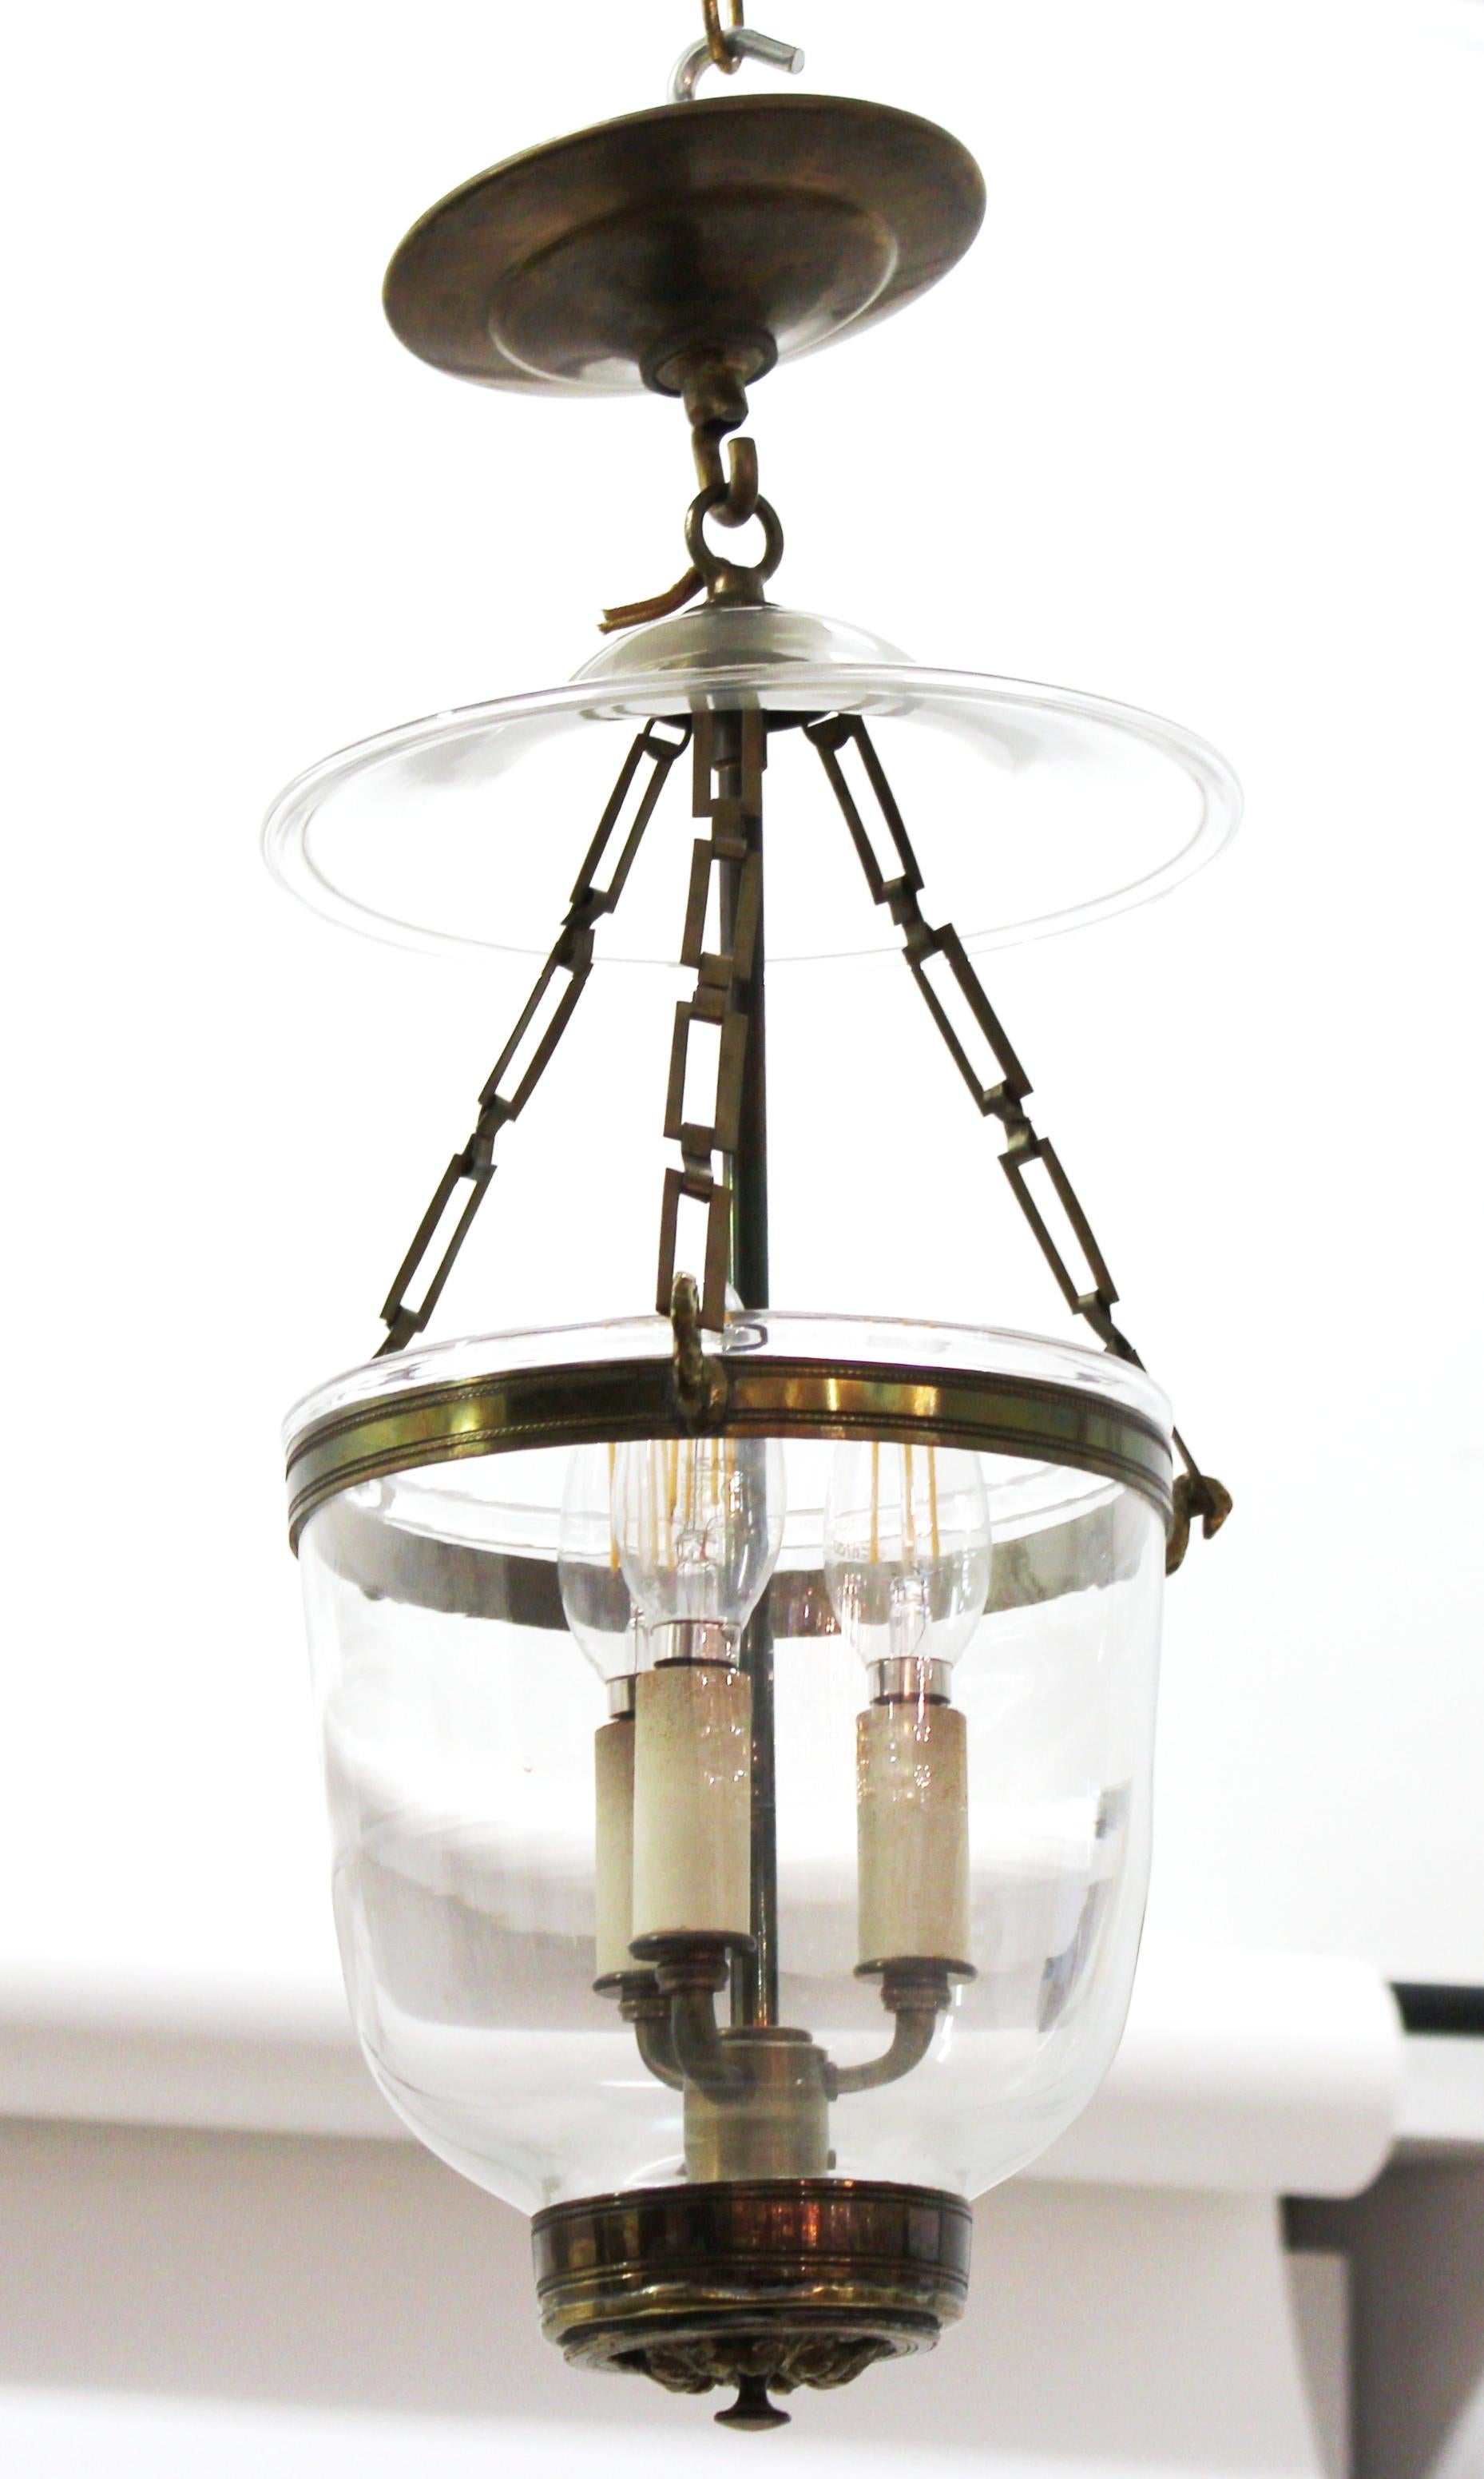 English Regency style pair of bell jar lanterns with glass shades.